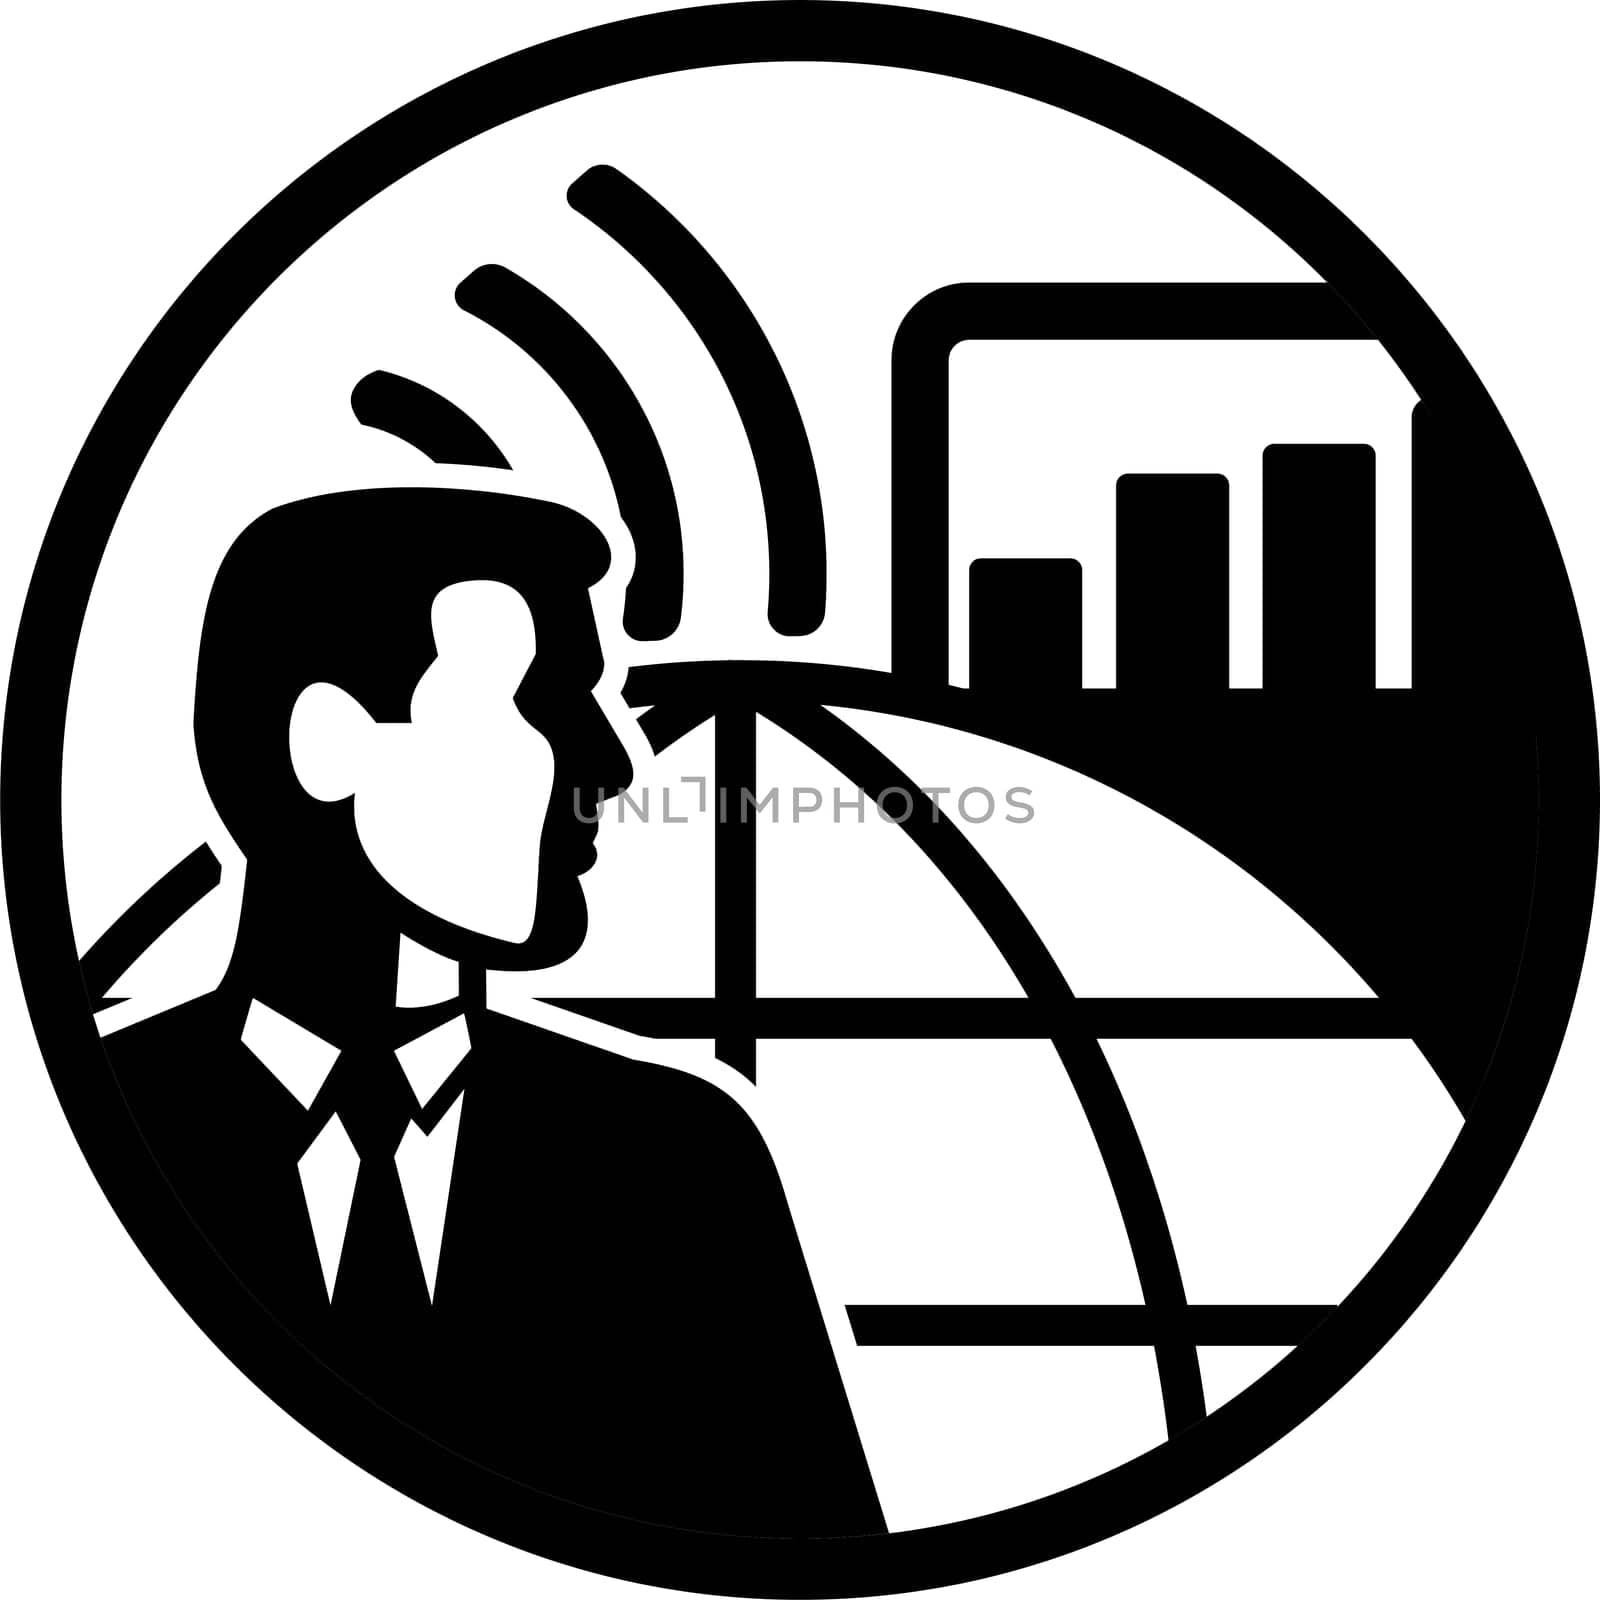 Retro style illustration of a businessman industrial engineer with internet connectivity, globe, sales graph, industrial buildings set inside circle on isolated background done in black and white. 
